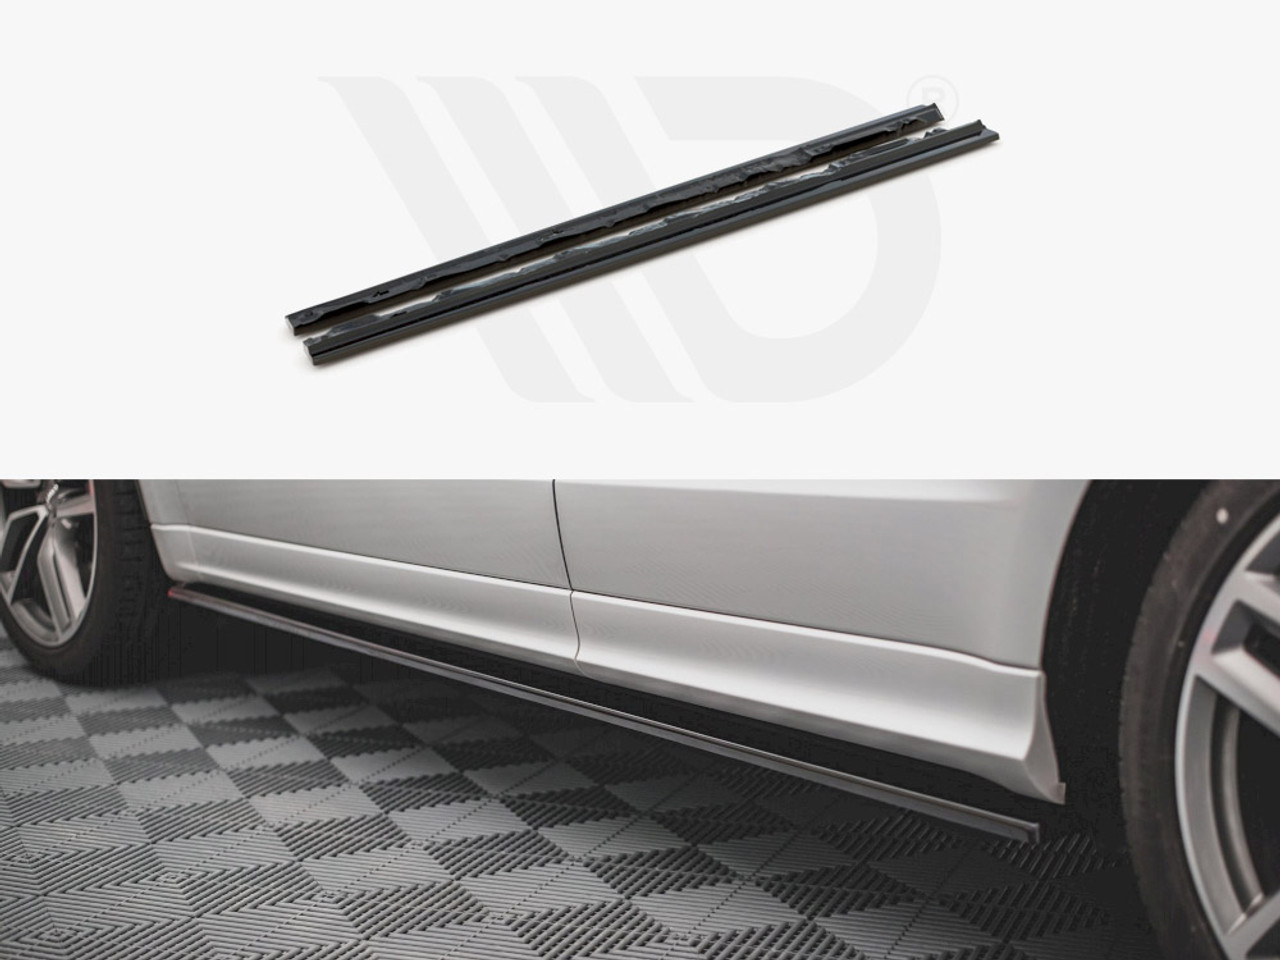 Seat Ibiza 6J - side skirts, side lists, running boards